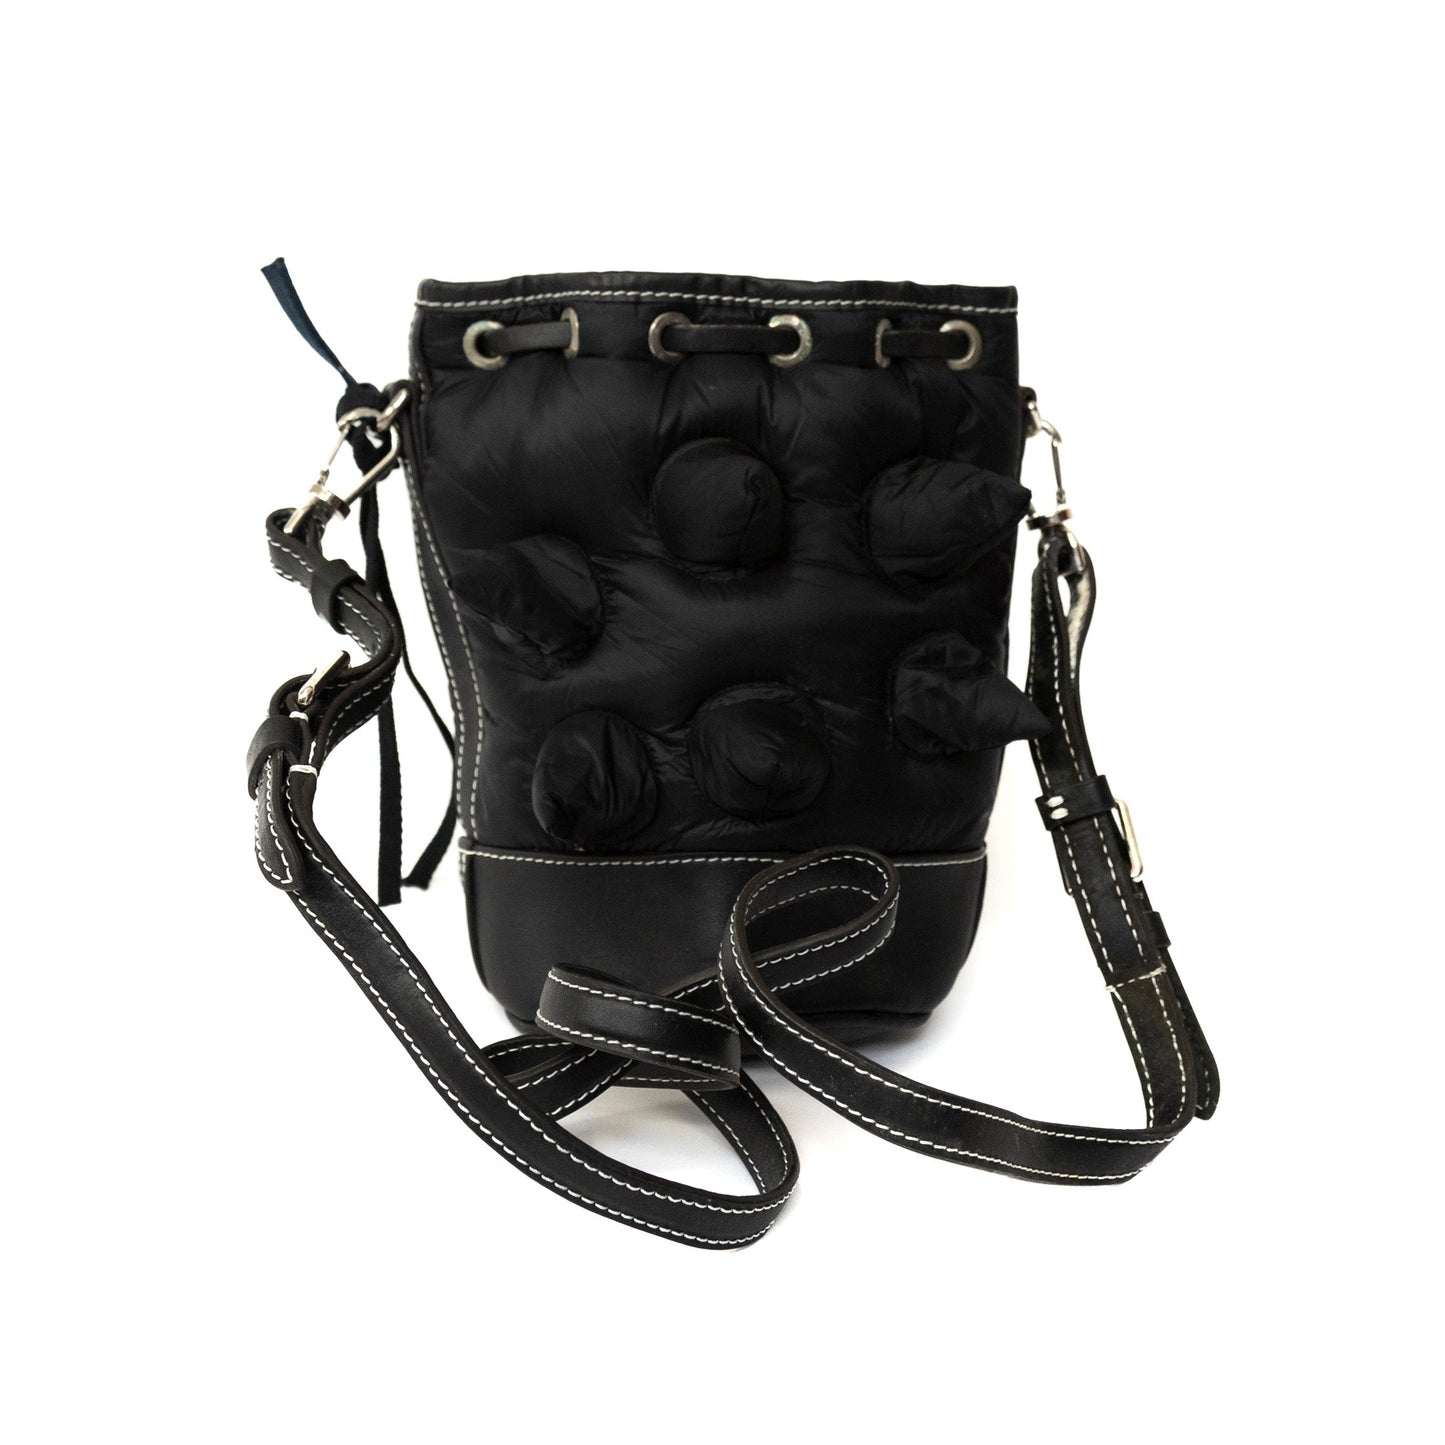 Moncler x JW Anderson "The Critter" Bucket Bag